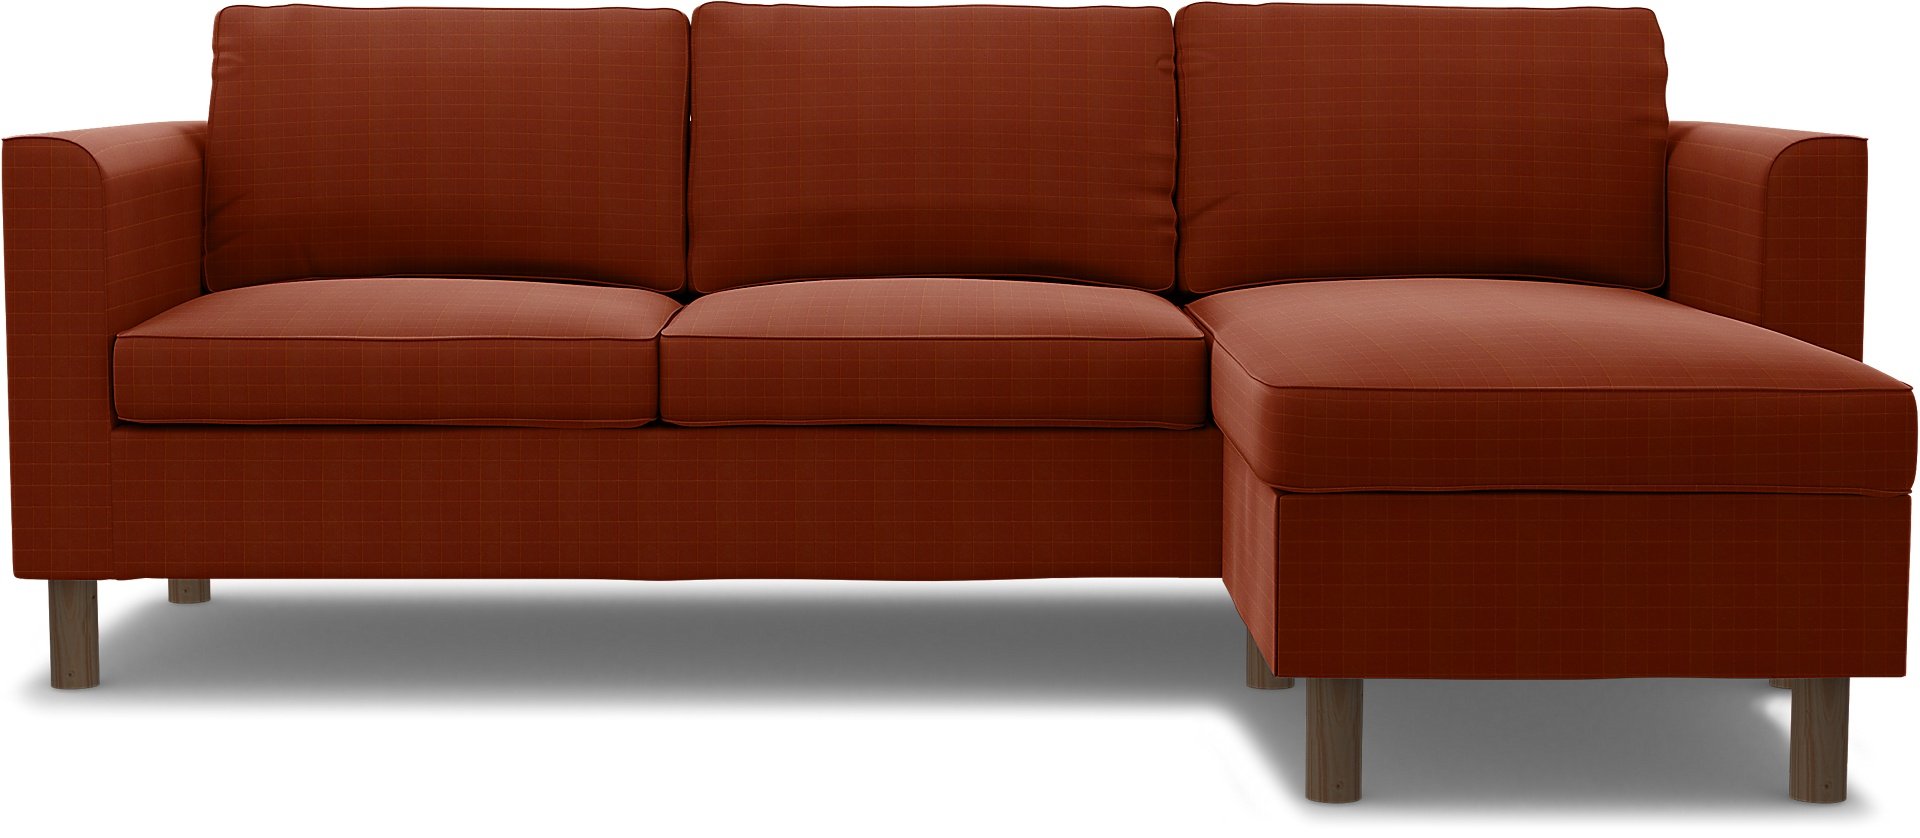 IKEA - Parup 3 Seater with chaise longue, Burnt Sienna, Moody Seventies Collection - Bemz